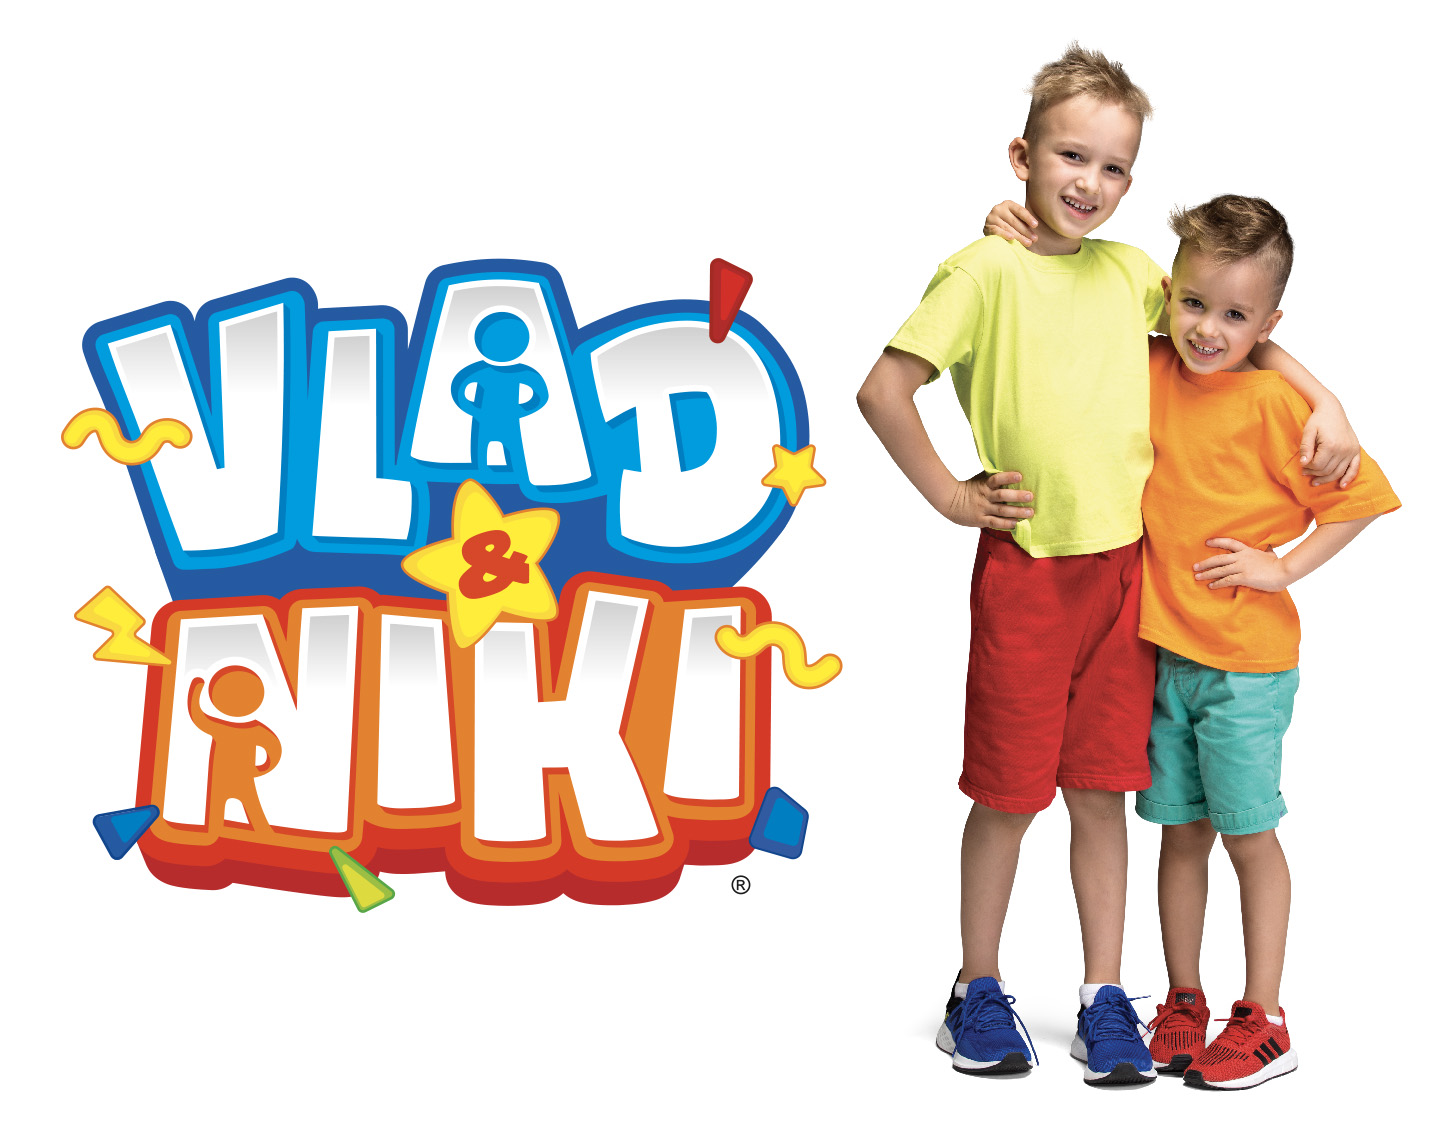 Wildbrain Cplg Presses Play On Deal For Vlad And Niki Licensing 